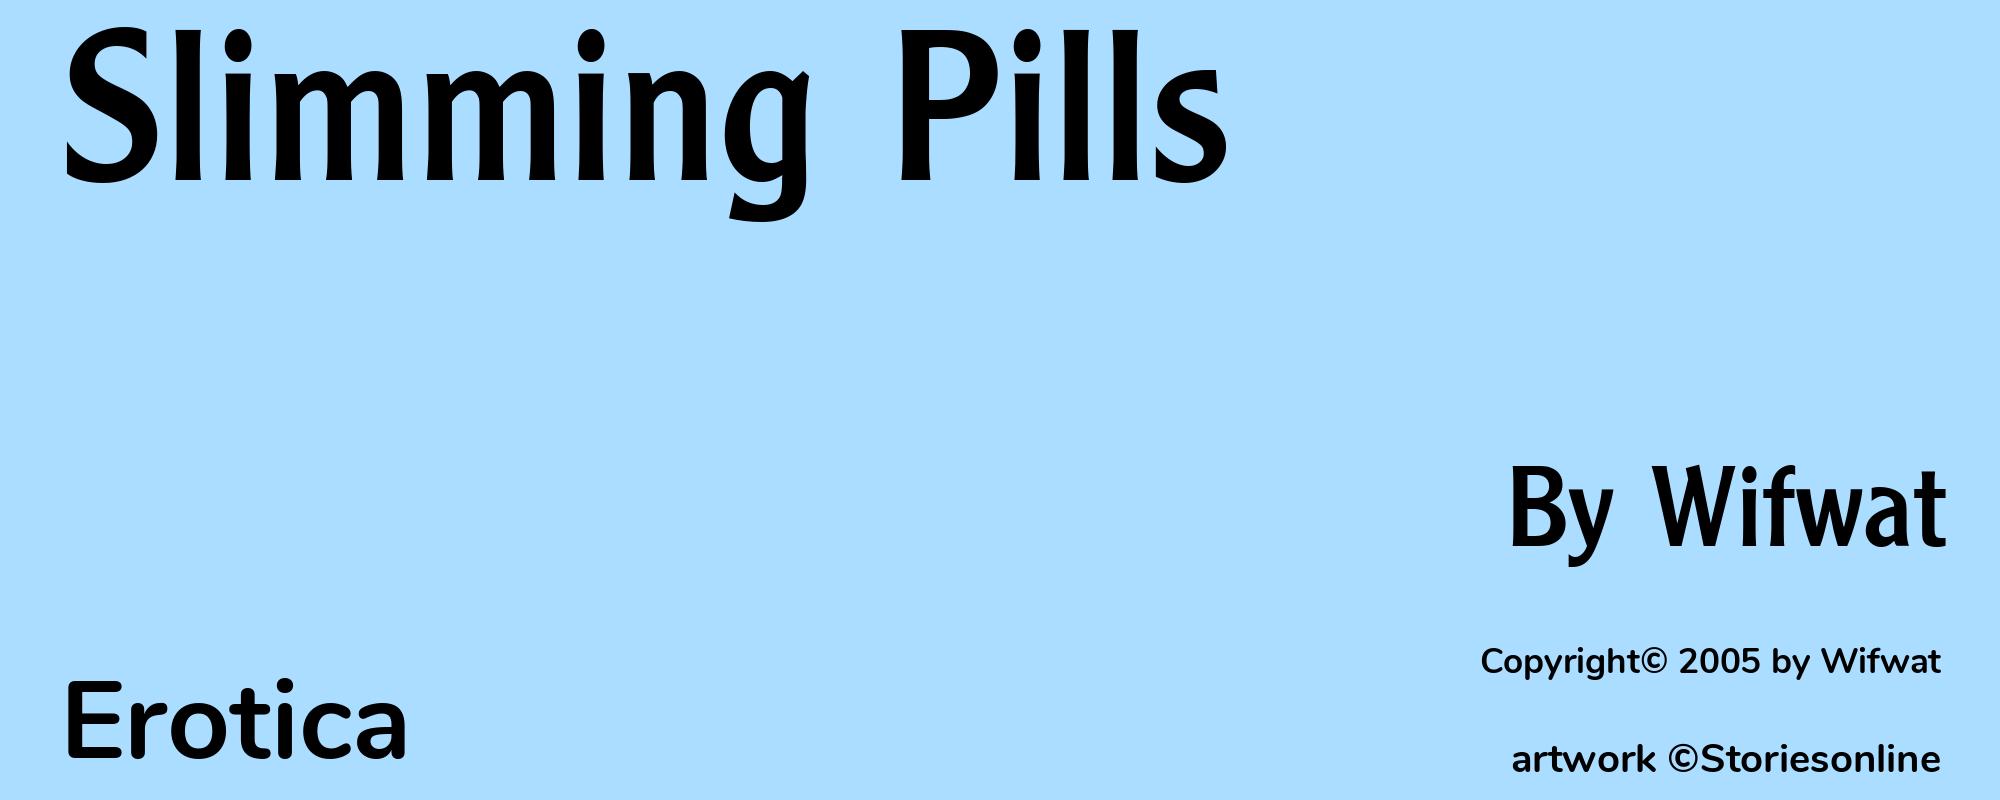 Slimming Pills - Cover